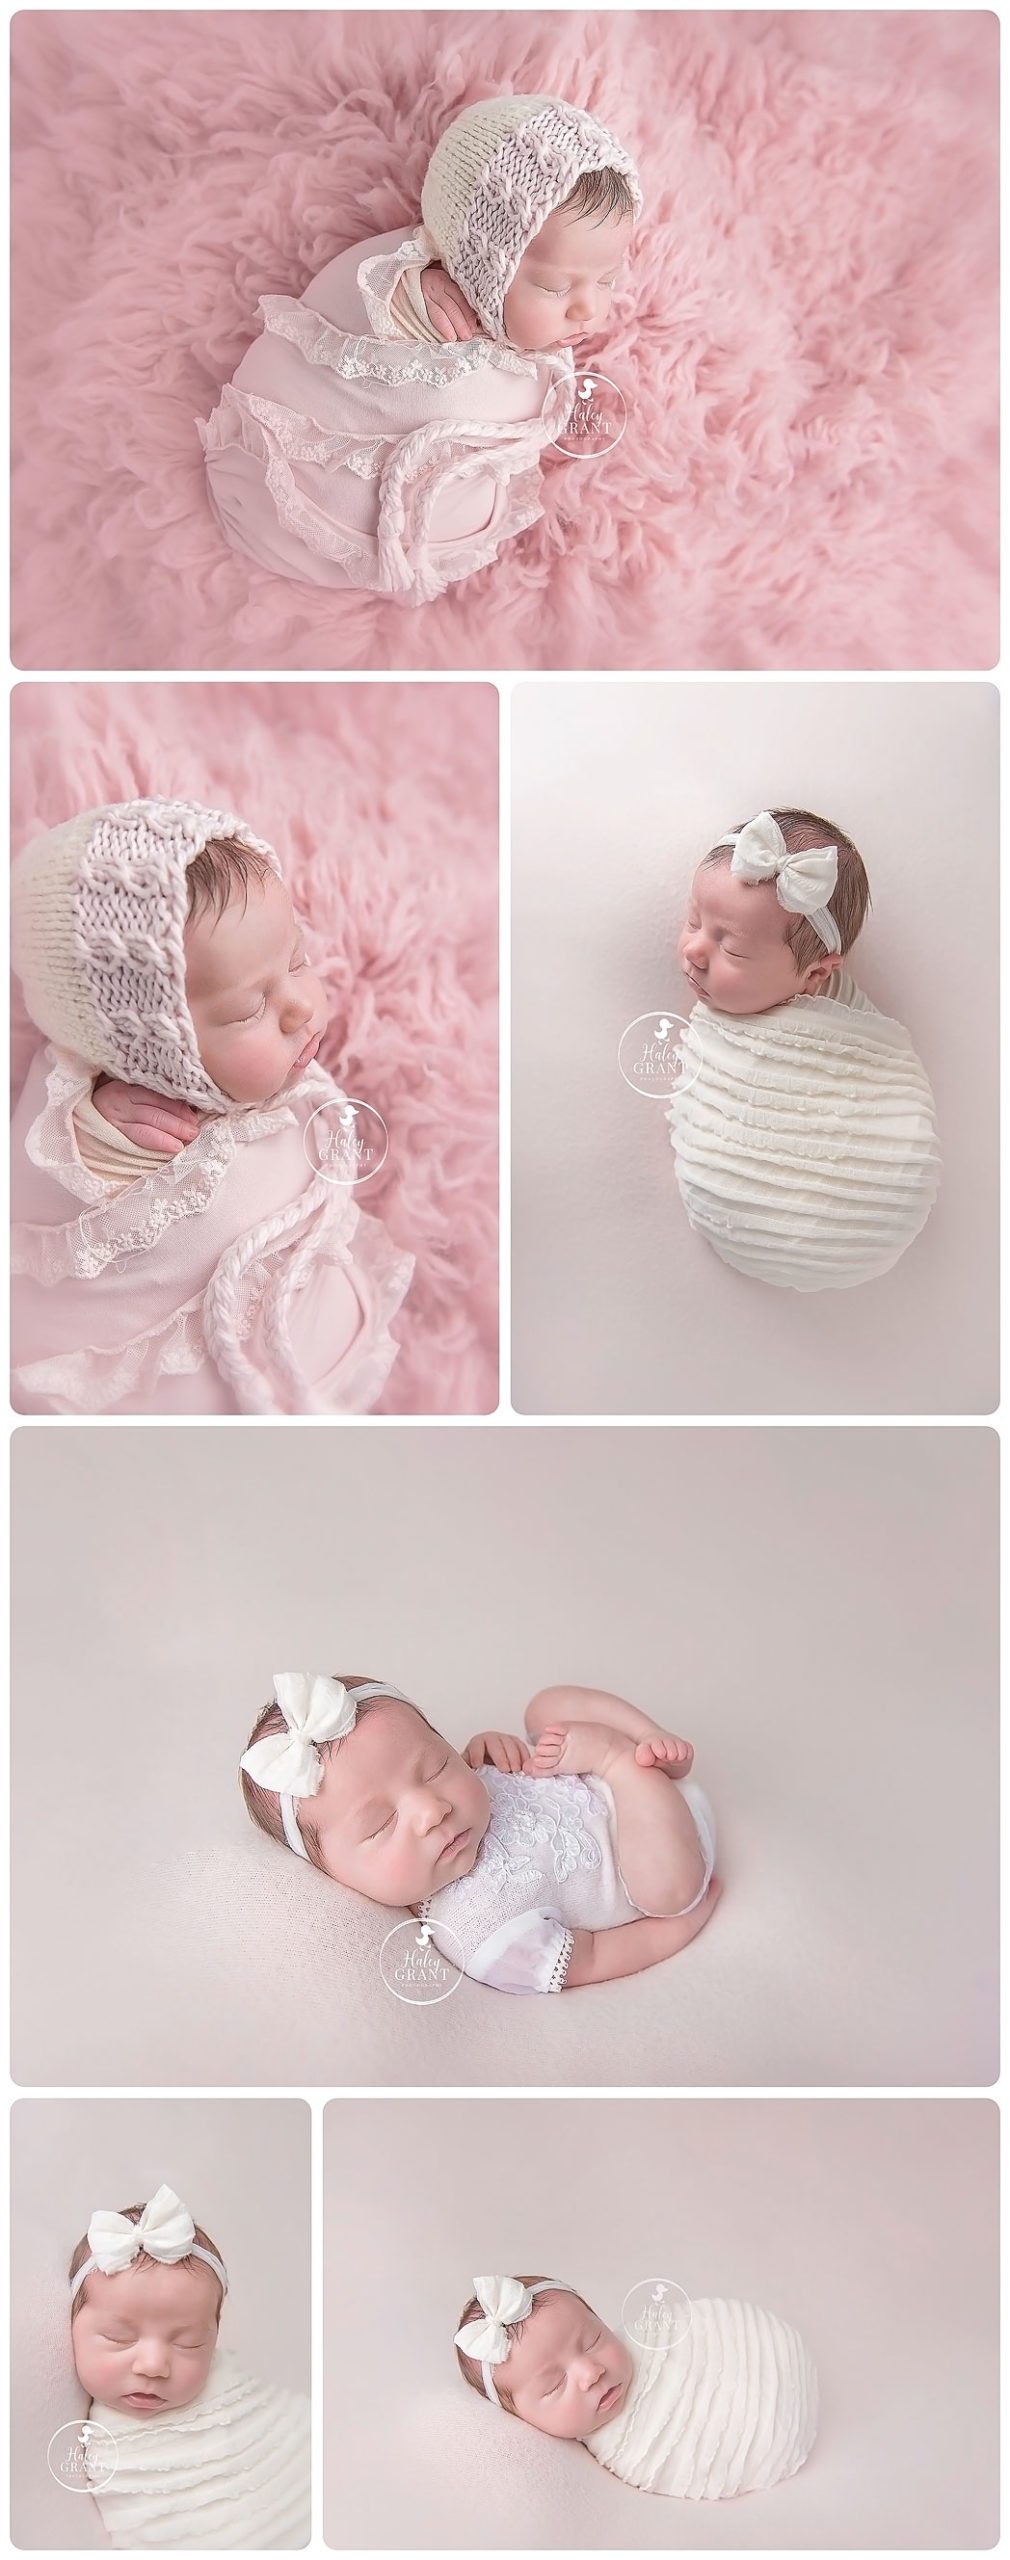 Austin Newborn Baby Photographer Haley offers affordable studio photo sessions that include high resolution digital files and a print release props included